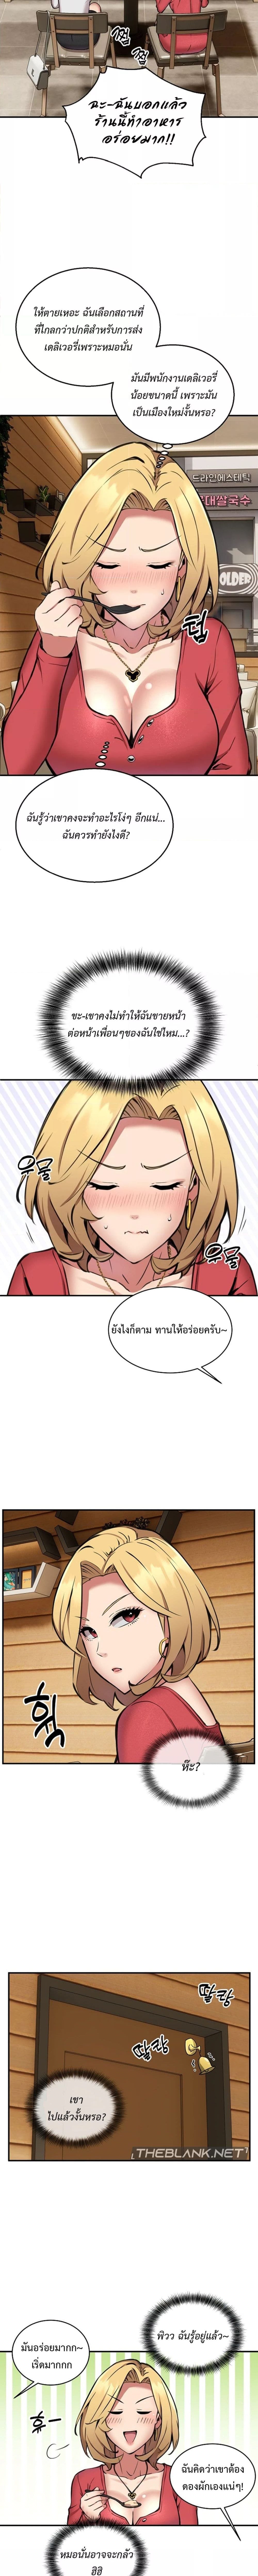 Driver in the New City ตอนที่ 7 ภาพ 11